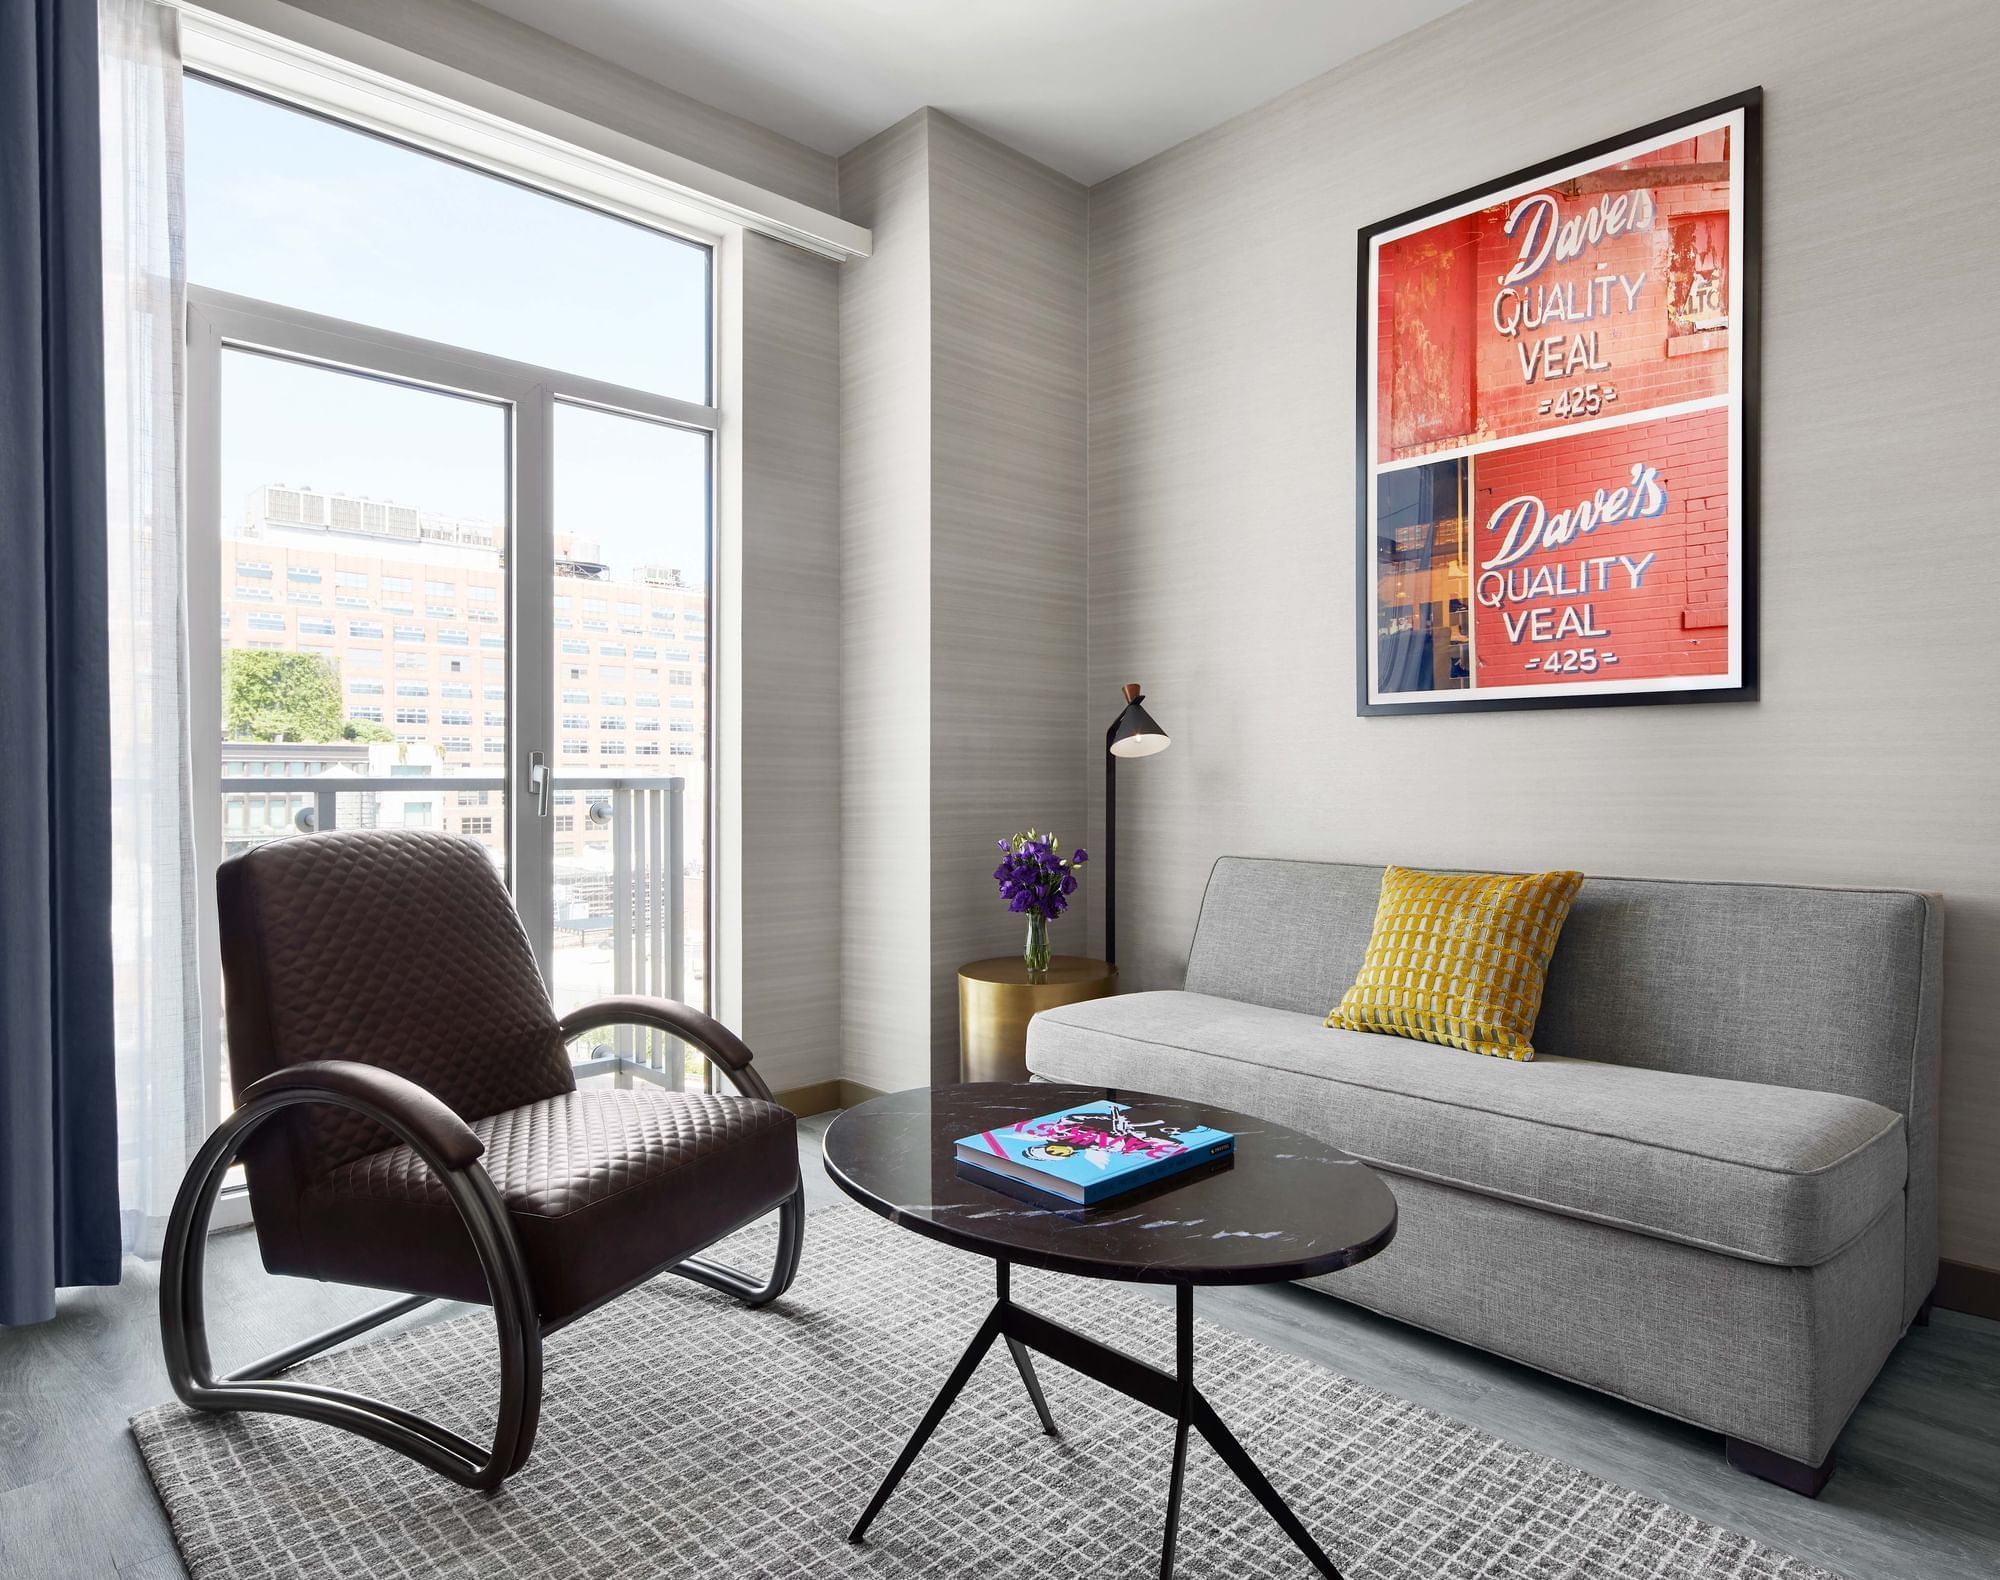 Suite living room area with couch, chair and juliet balcony with art on the wall showcasing the Meatpacking District